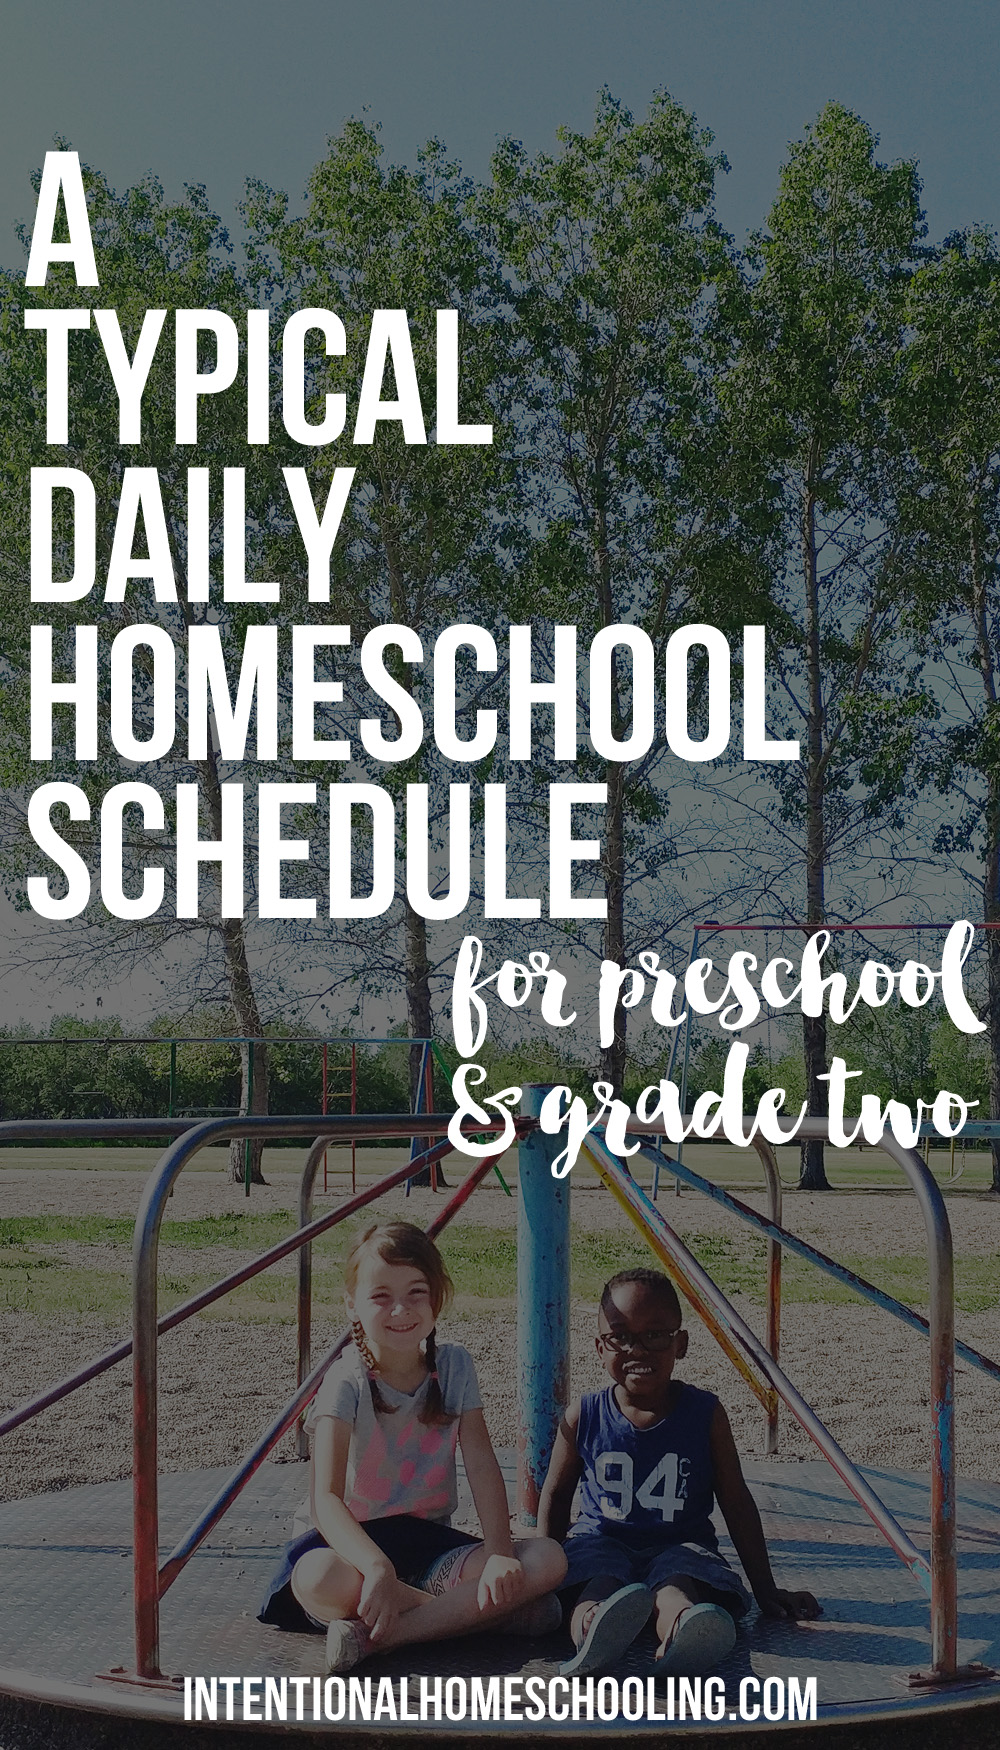 Our Typical Daily Homeschool Schedule and Routine - for preschool (pre-kindergarten) and grade two with lots of free play!